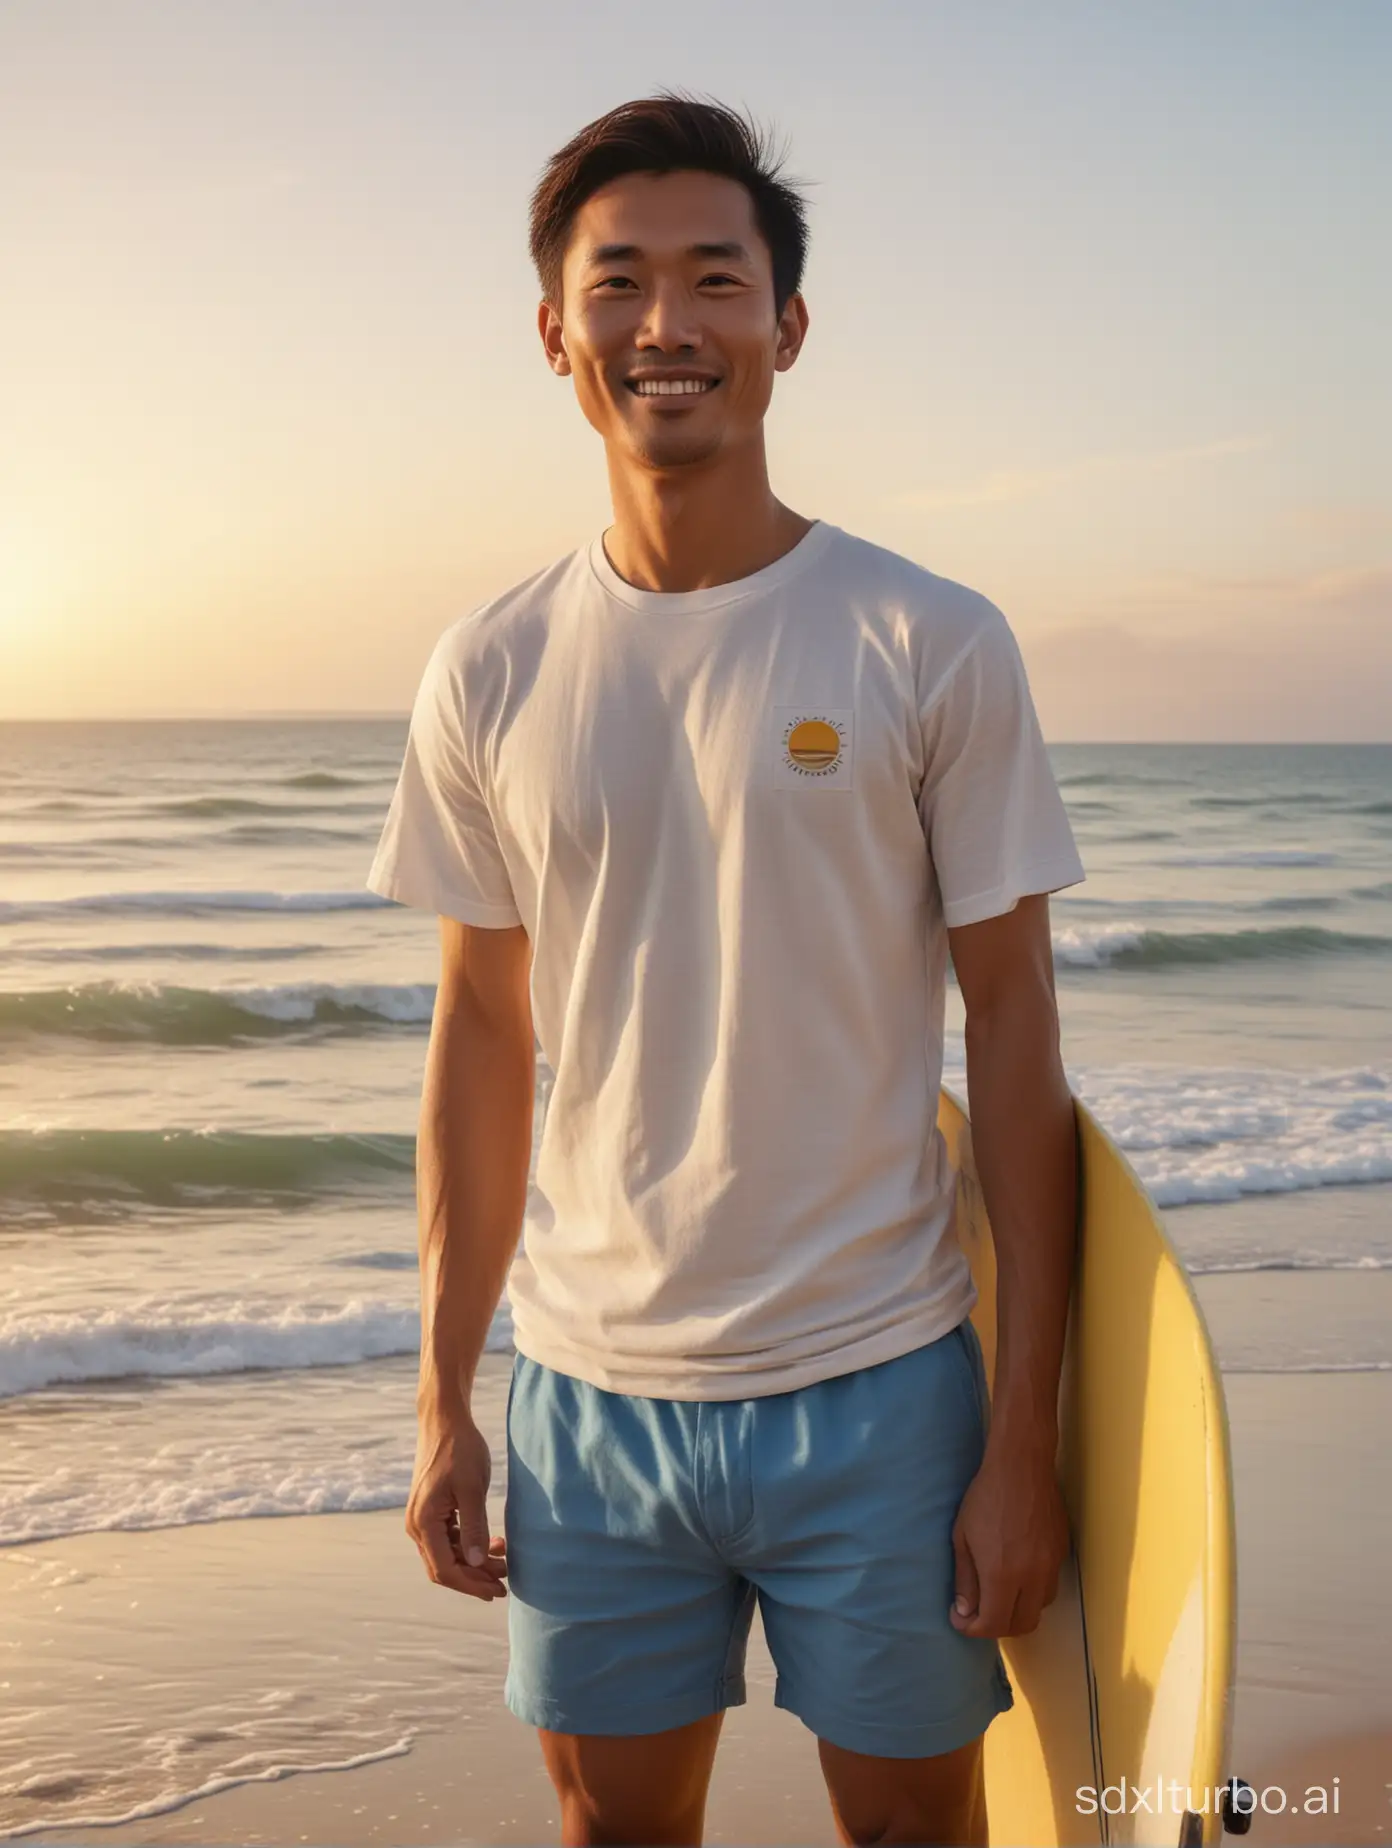 Chinese-Surfing-Coach-Enjoying-Sunset-on-Golden-Beach-with-Surfboard